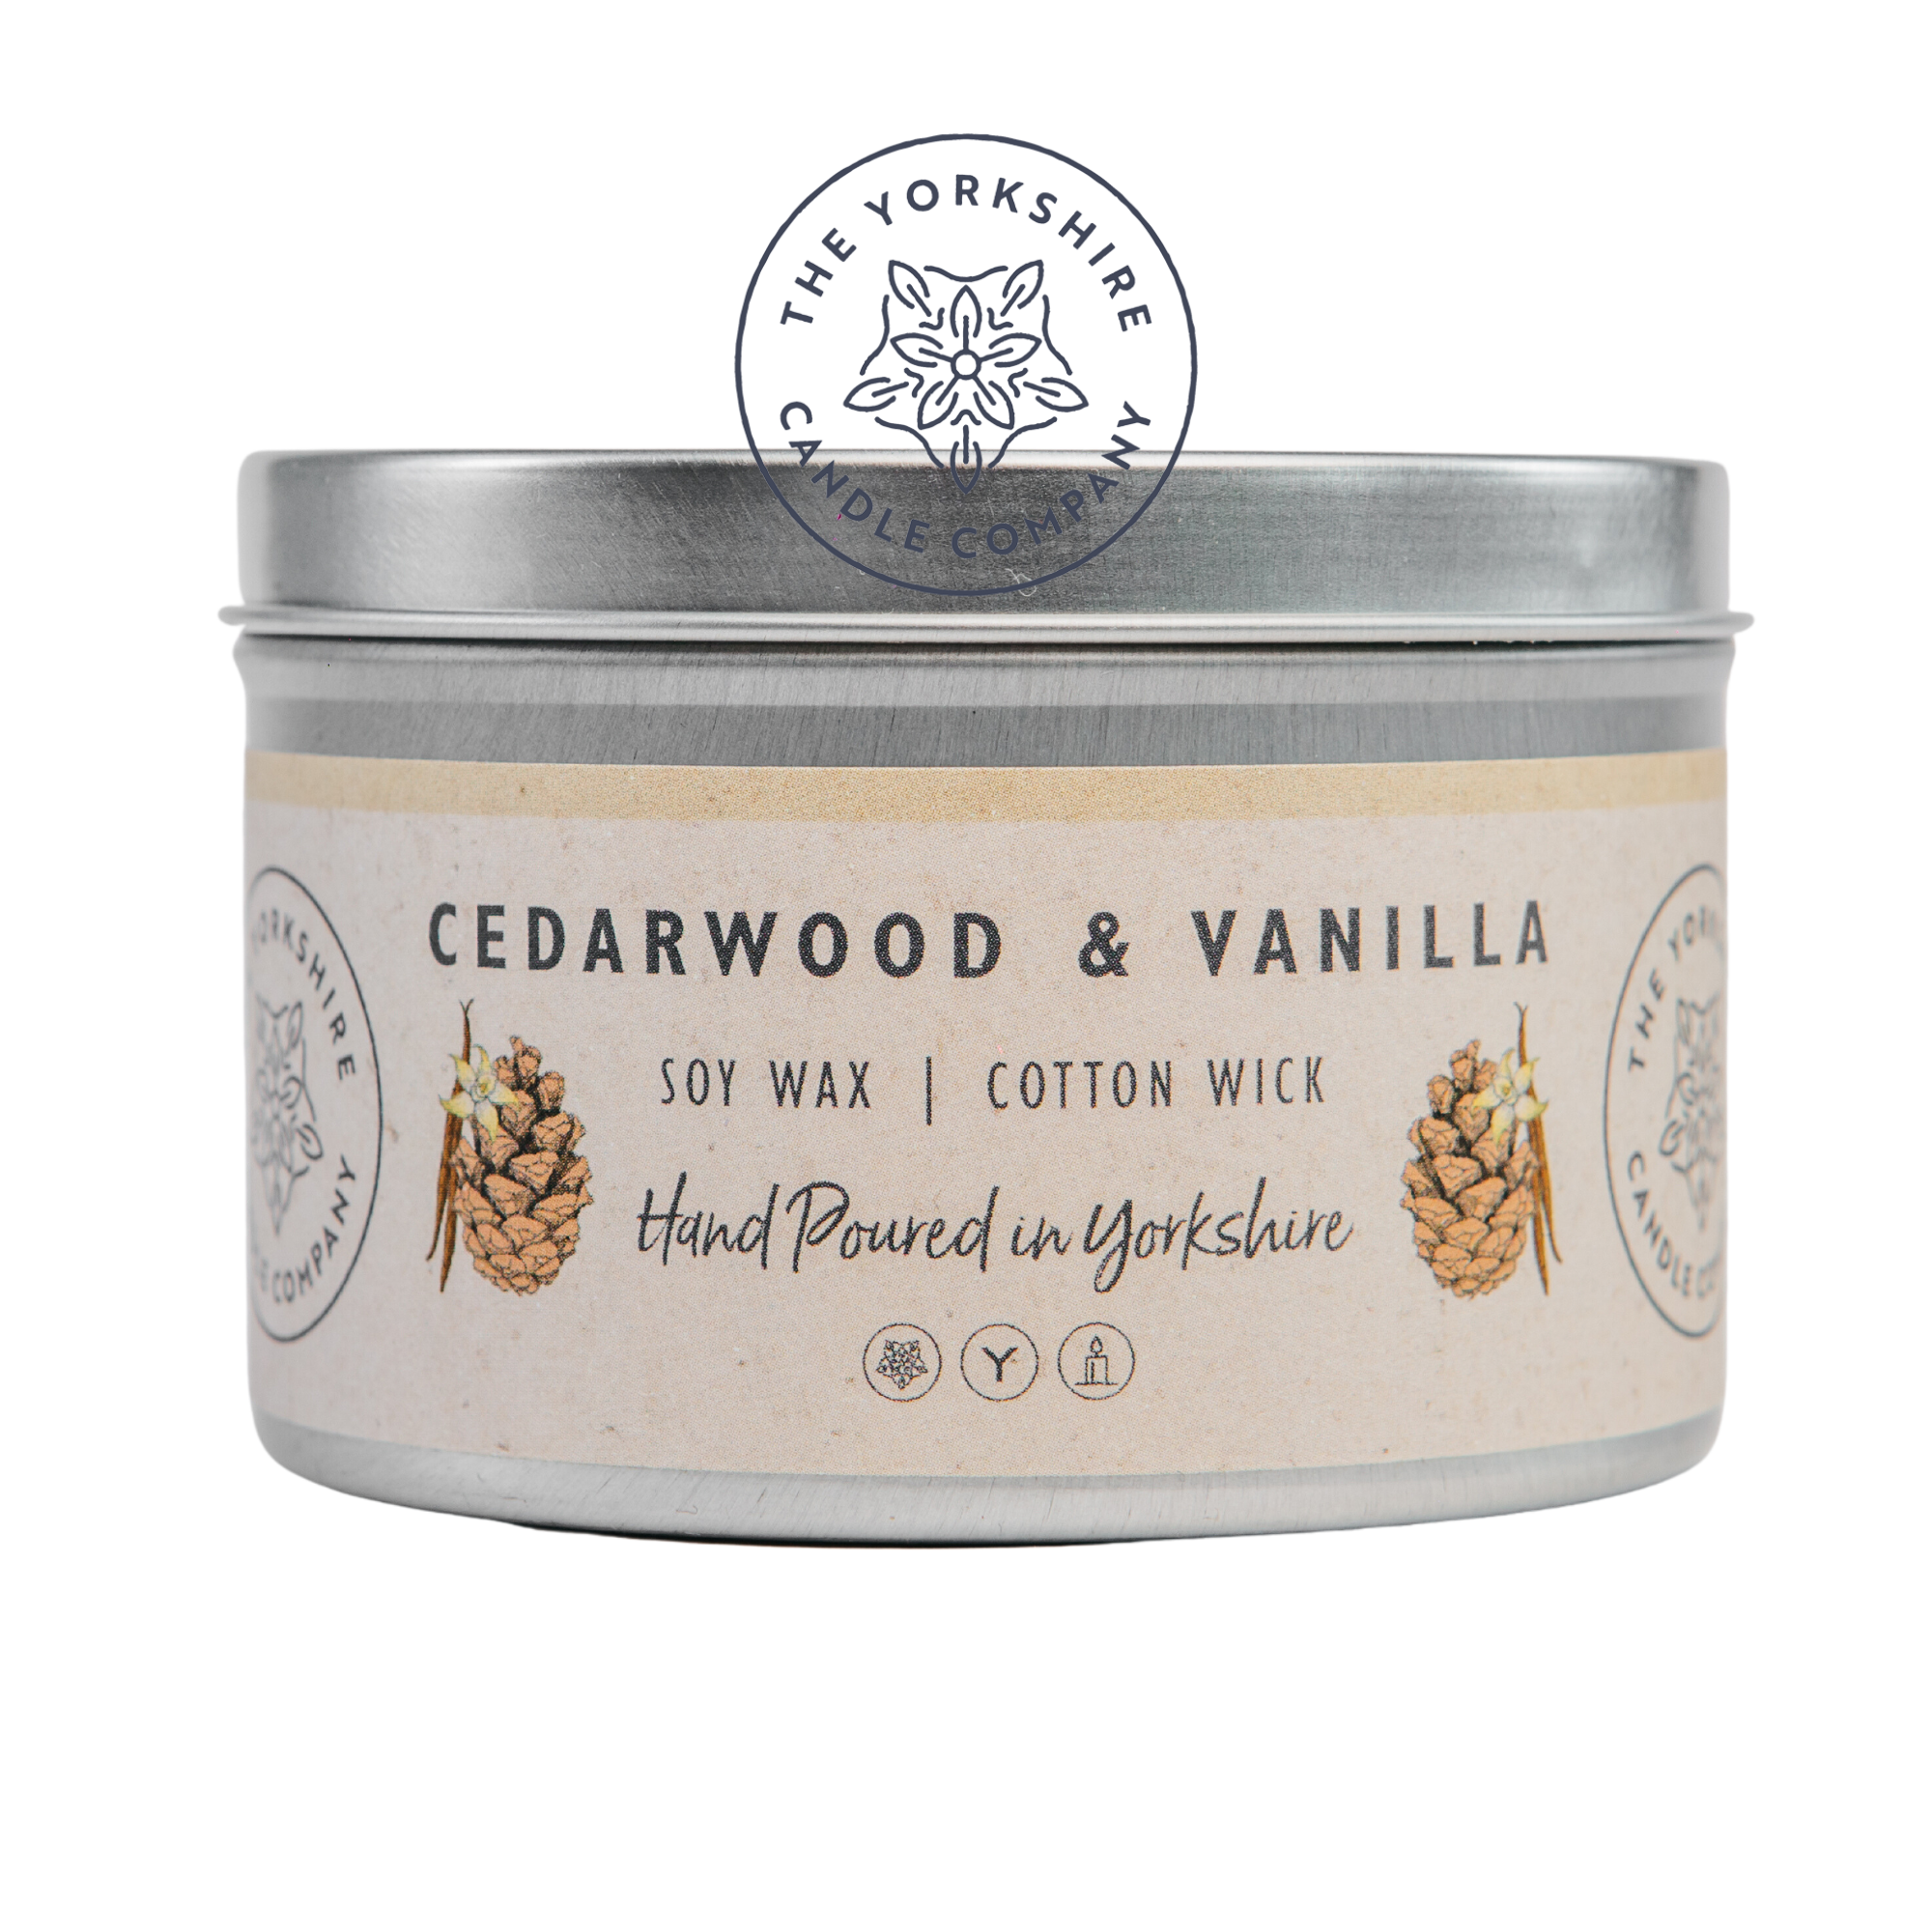 Cedarwood & Vanilla - Soy Wax Cotton Wick Hand Poured Candle by The Yorkshire Candle Company